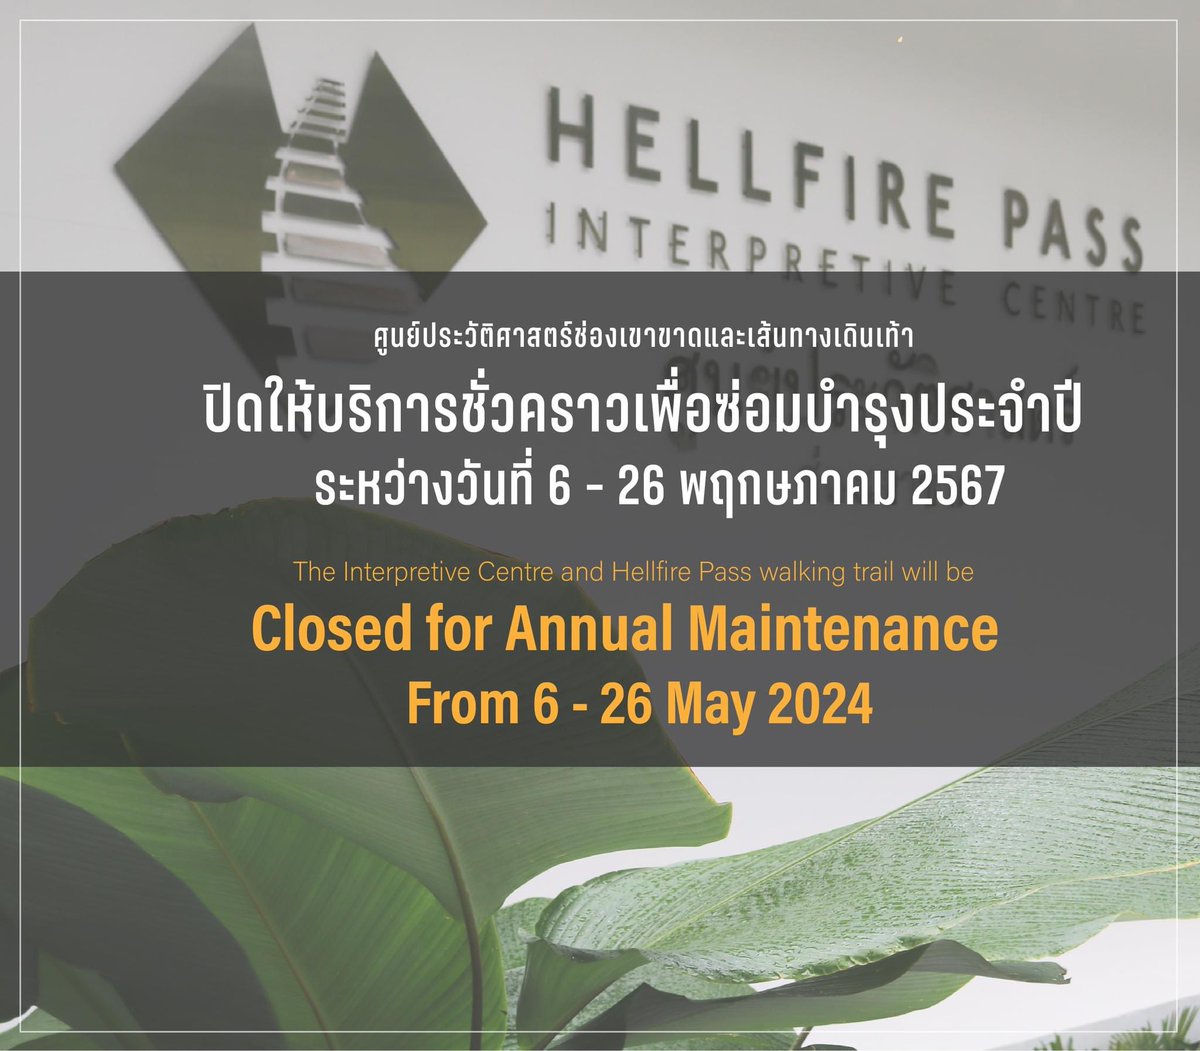 Visitors are kindly reminded that the Centre will be closed for extensive maintenance from 6-26 May 2024. Access to the Centre building and walking trail will not be possible during this period. We apologise for any inconvenience this may cause #HellfirePass #Kanchanaburi